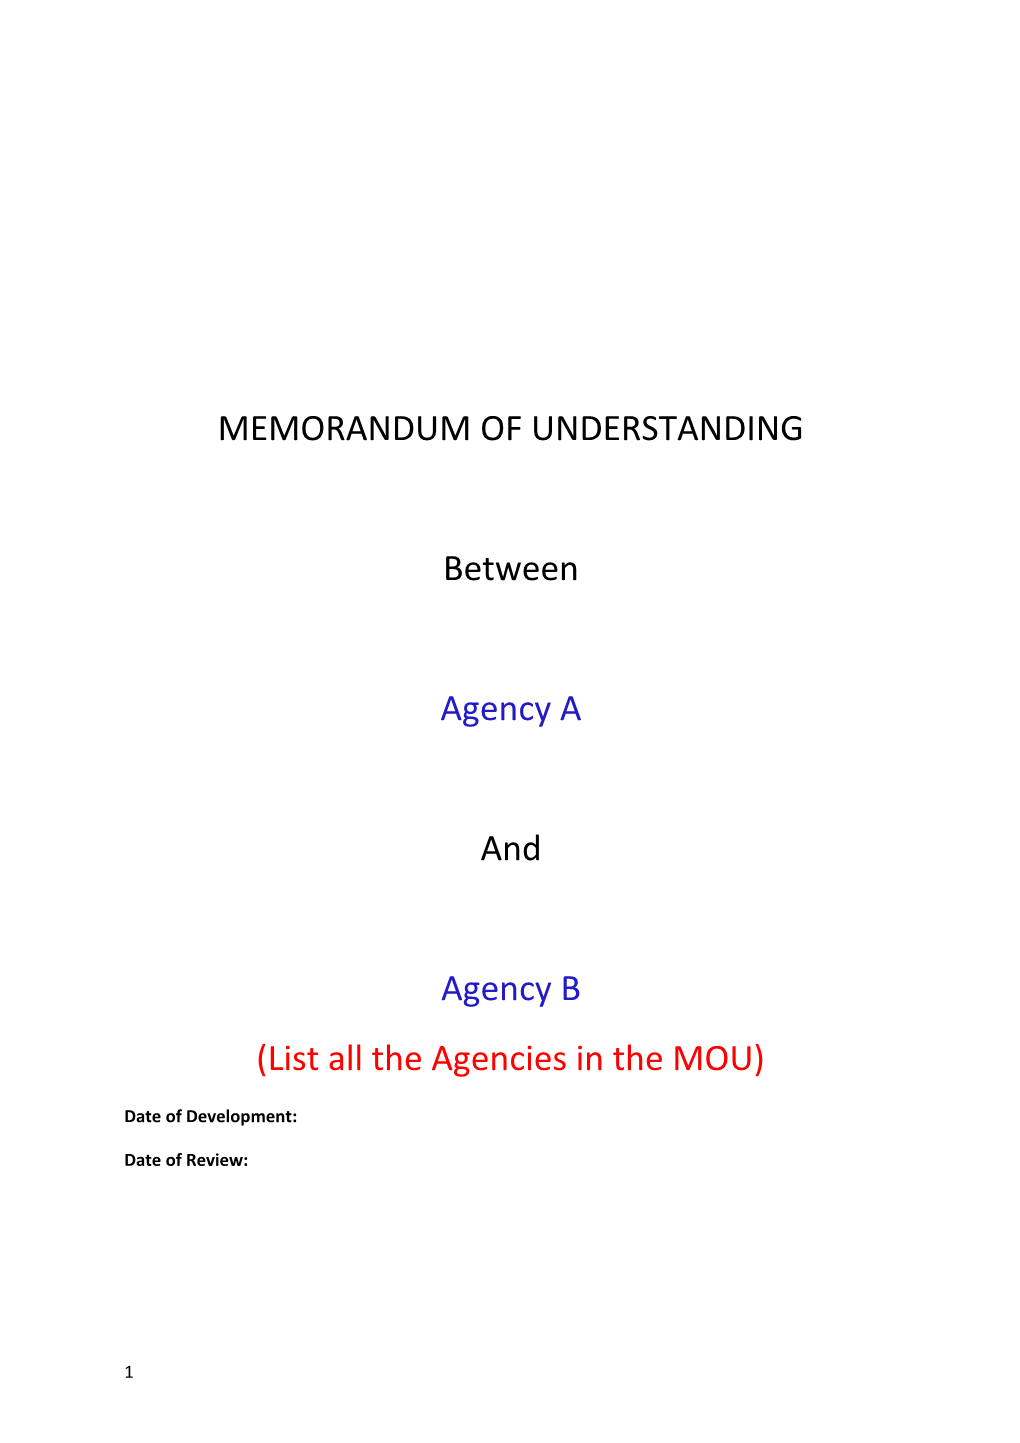 List All the Agencies in the MOU